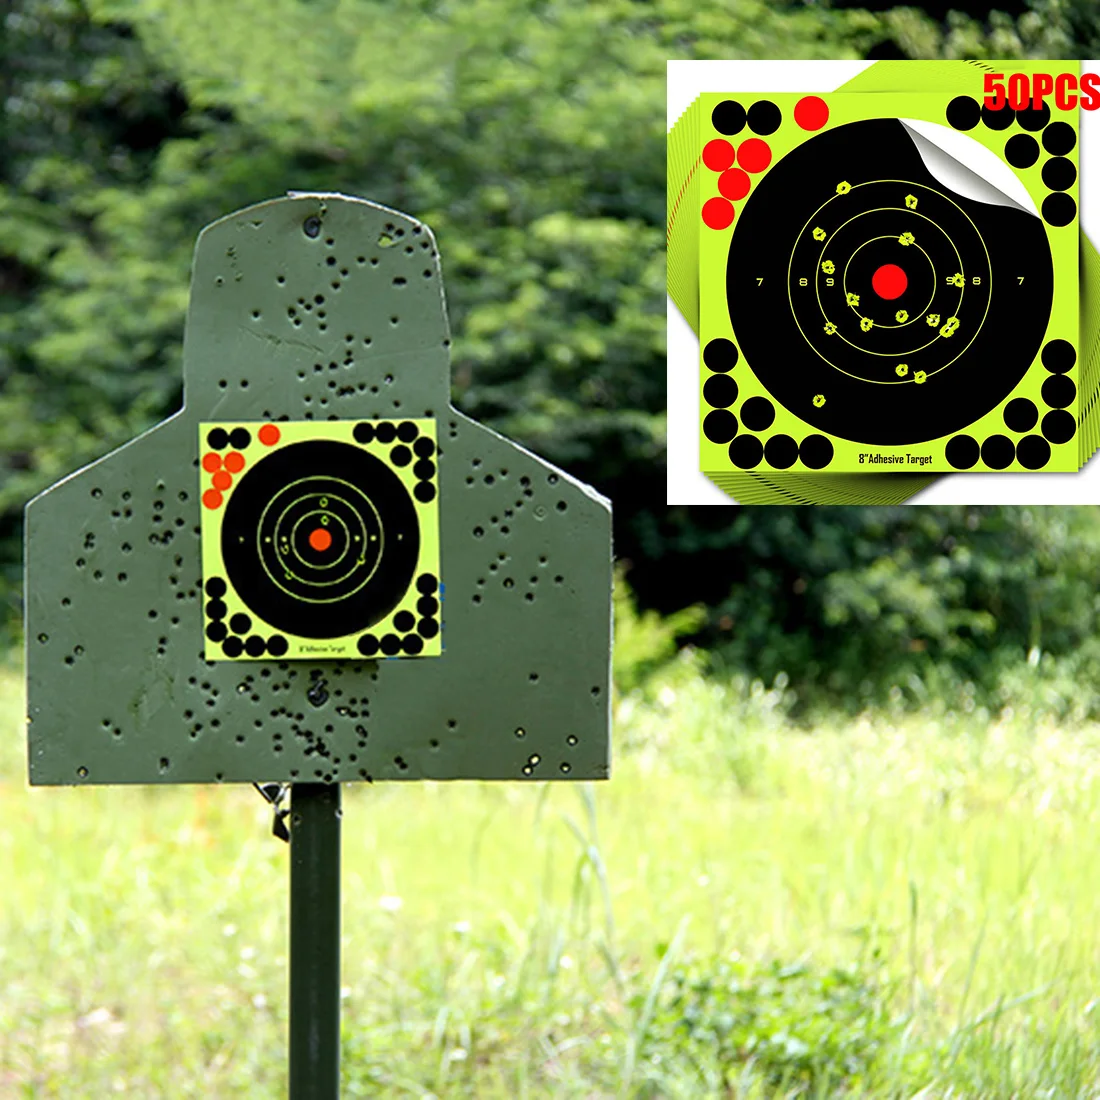 50pcs Splatter Flower Objective Colorful 8-Inch Targets Stickers 2020 Hot Sale Shoot Target Adhesive Reactivity Aim Shoot Target